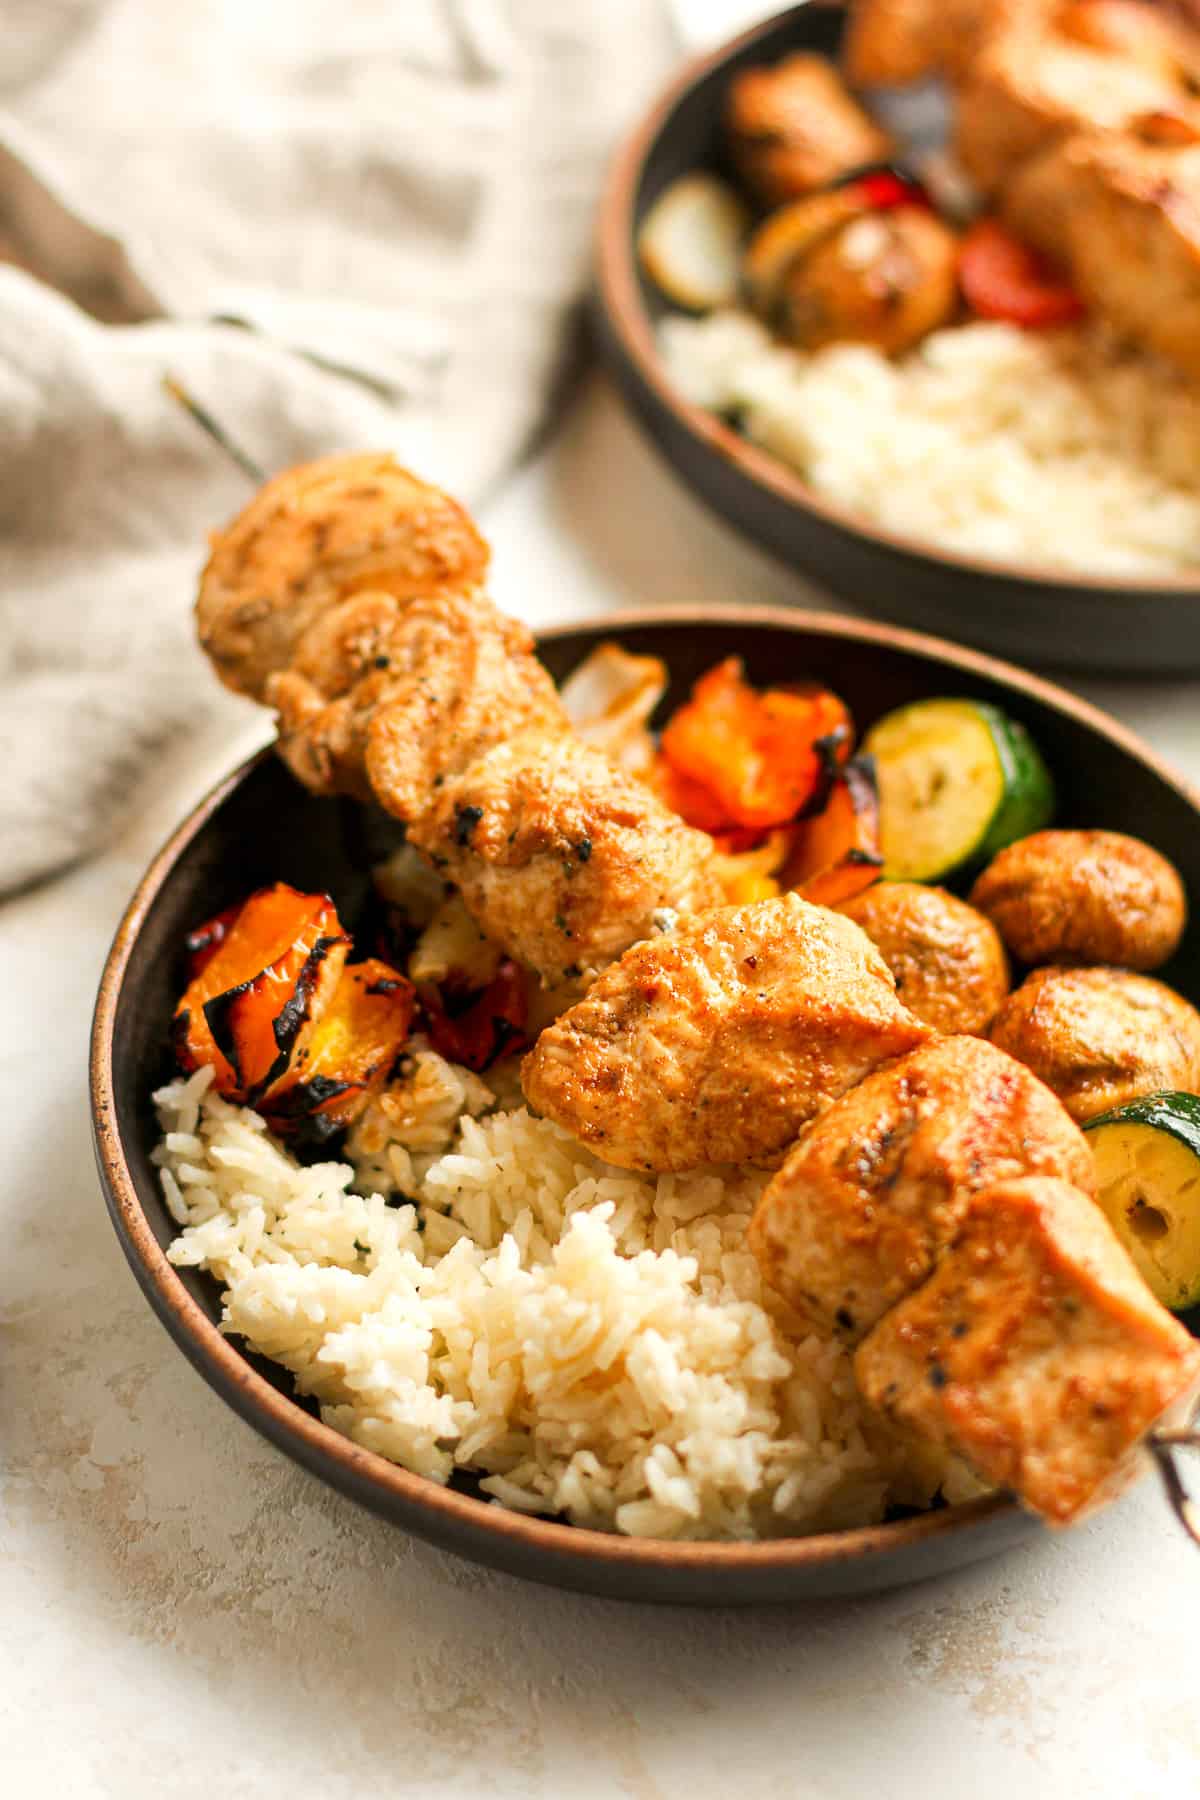 Side view of two bowls of rice, veggies, and skewered chicken.